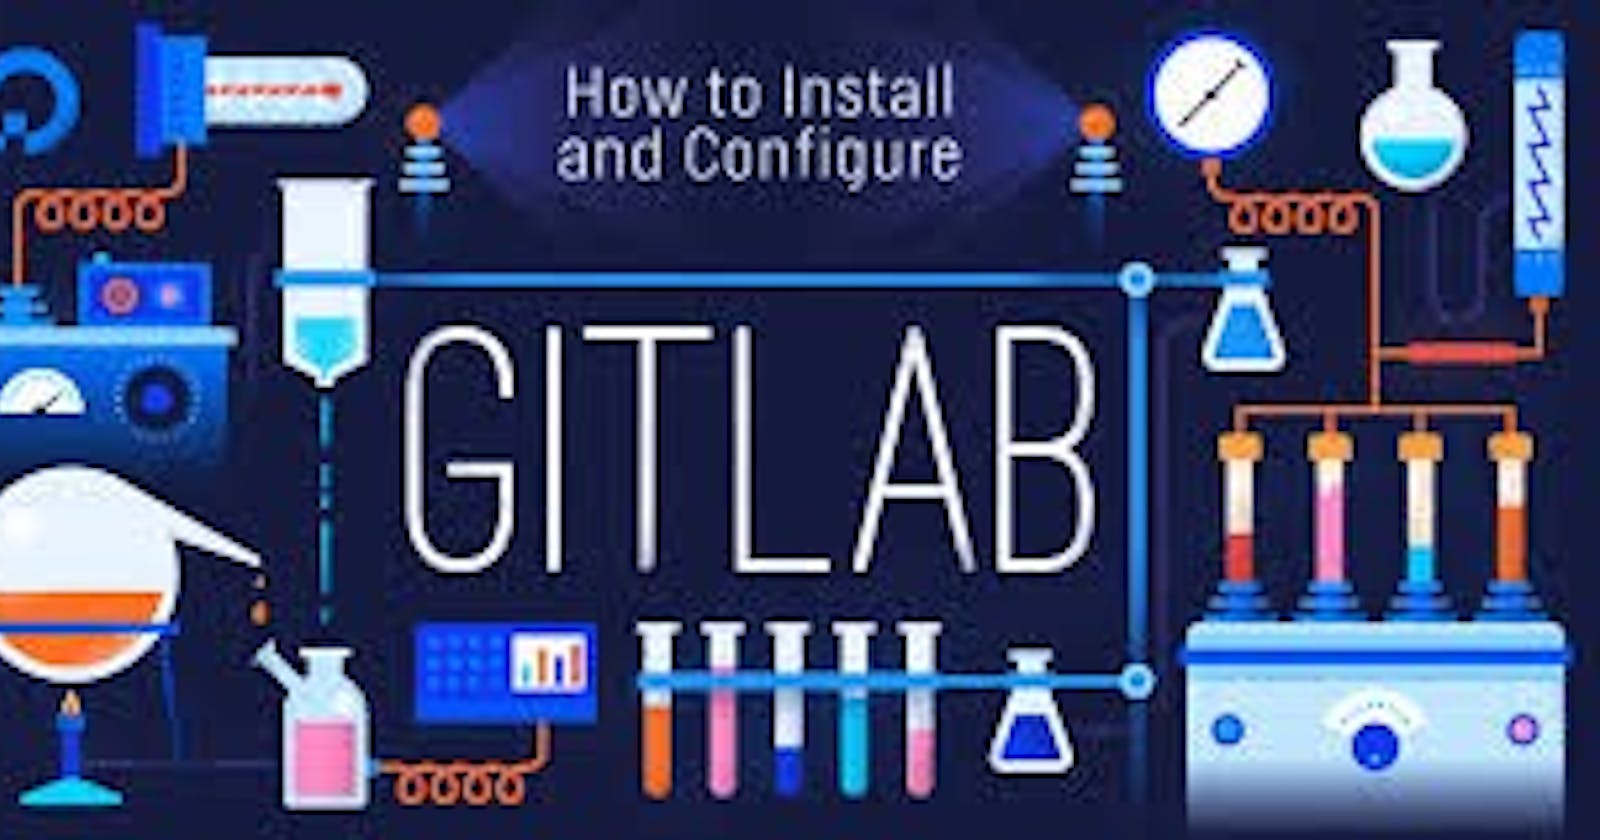 How To Install and Configure Gitlab on Apache Server in your VPS